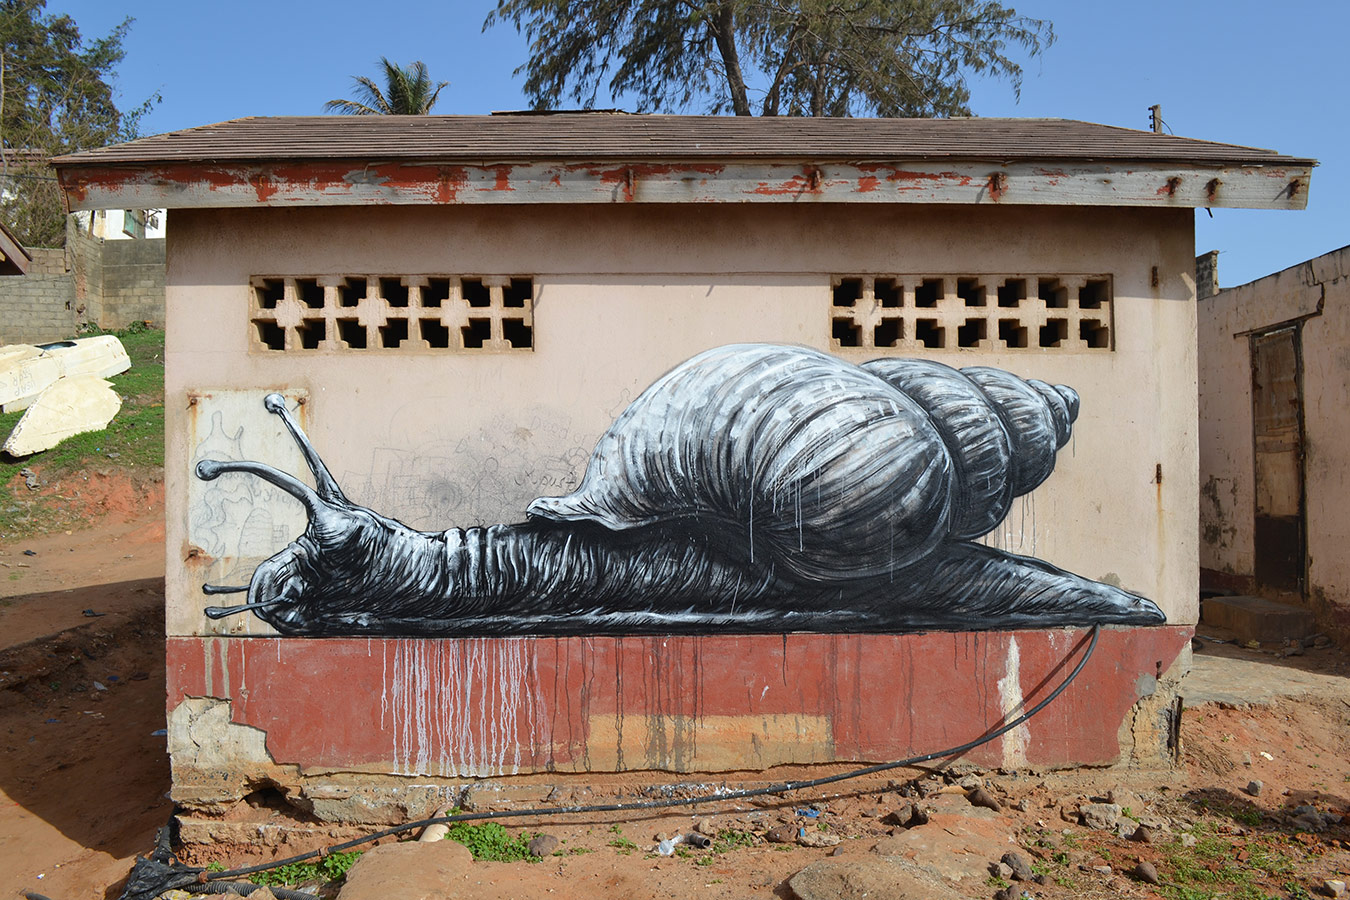  roa snail gambia africa